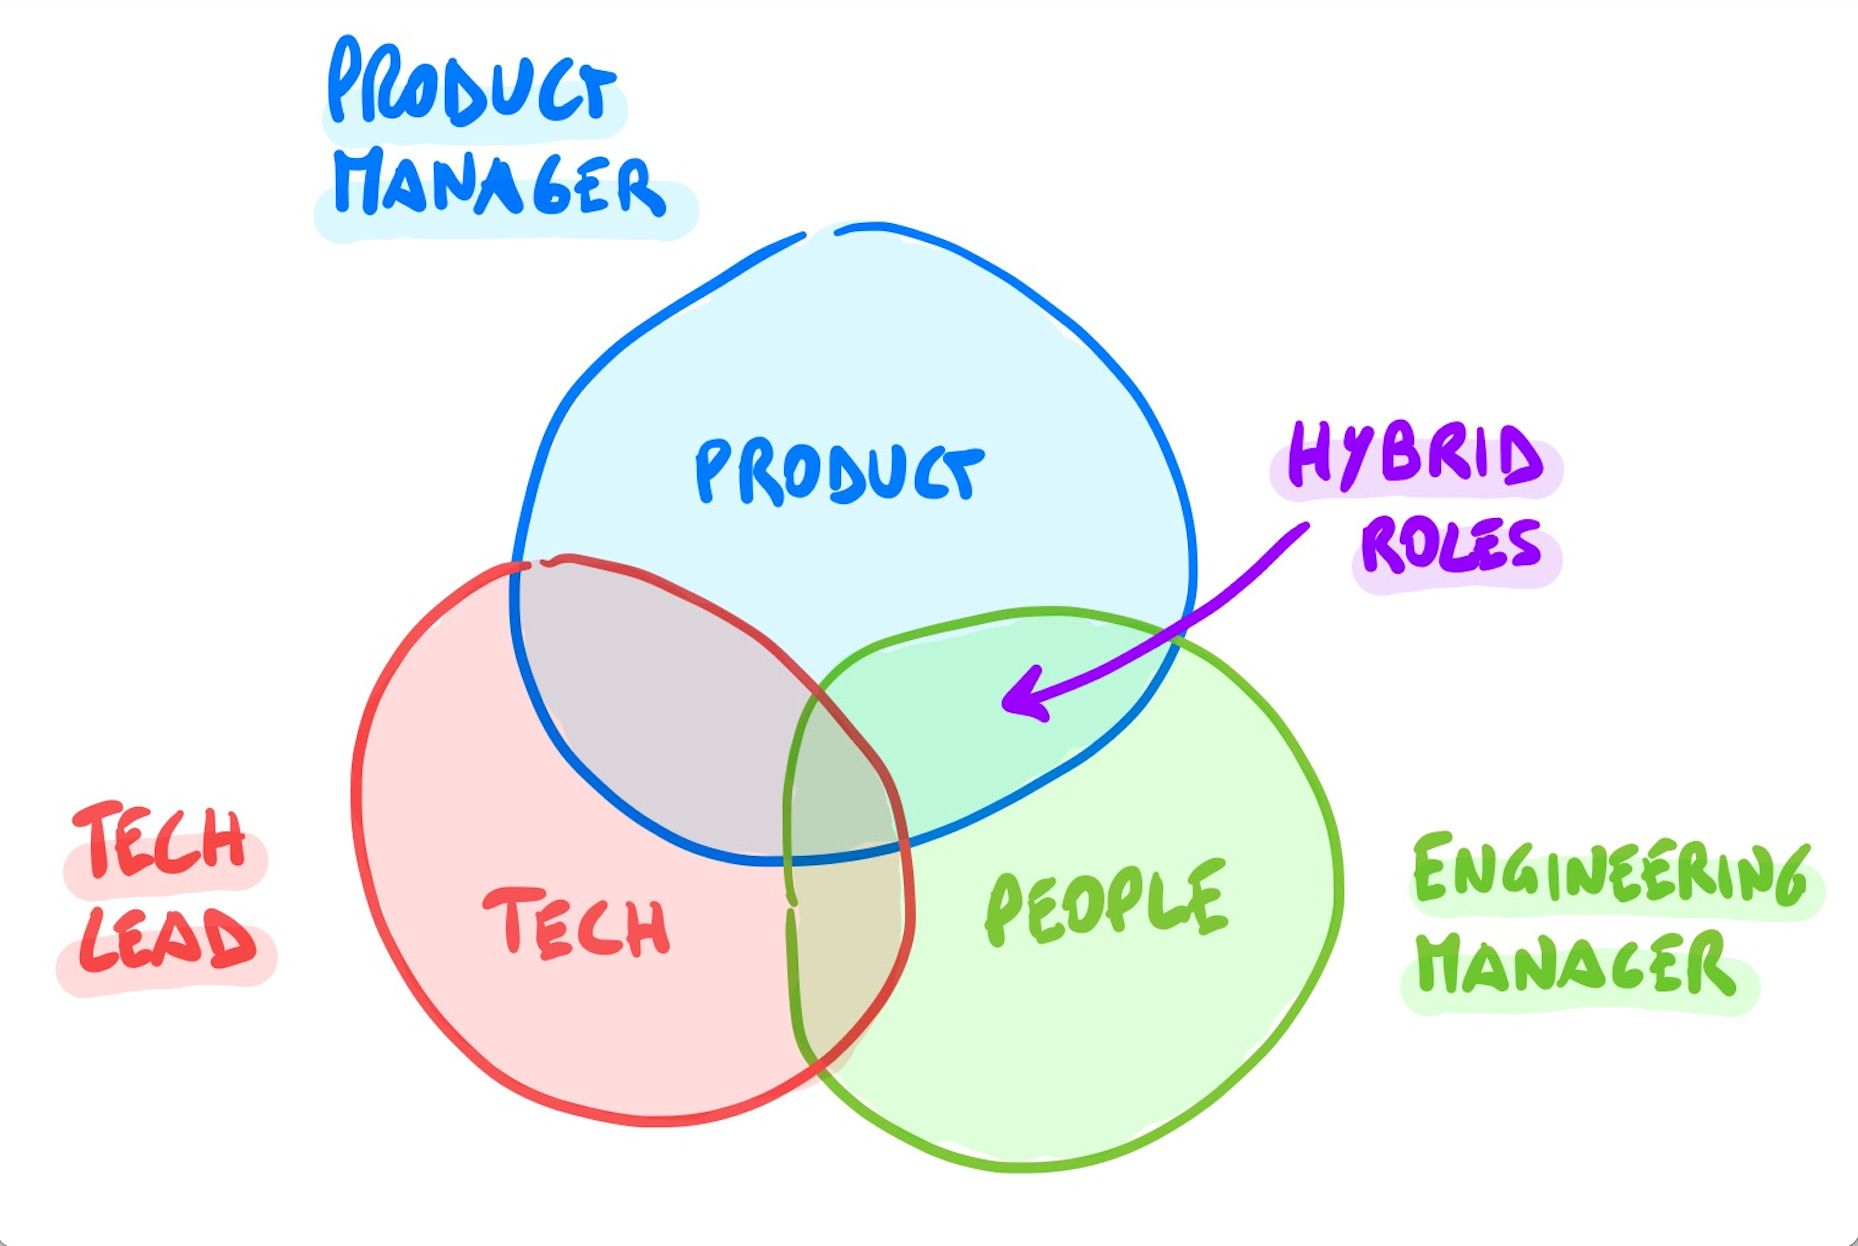 What are the roles and responsibilities of a technical manager